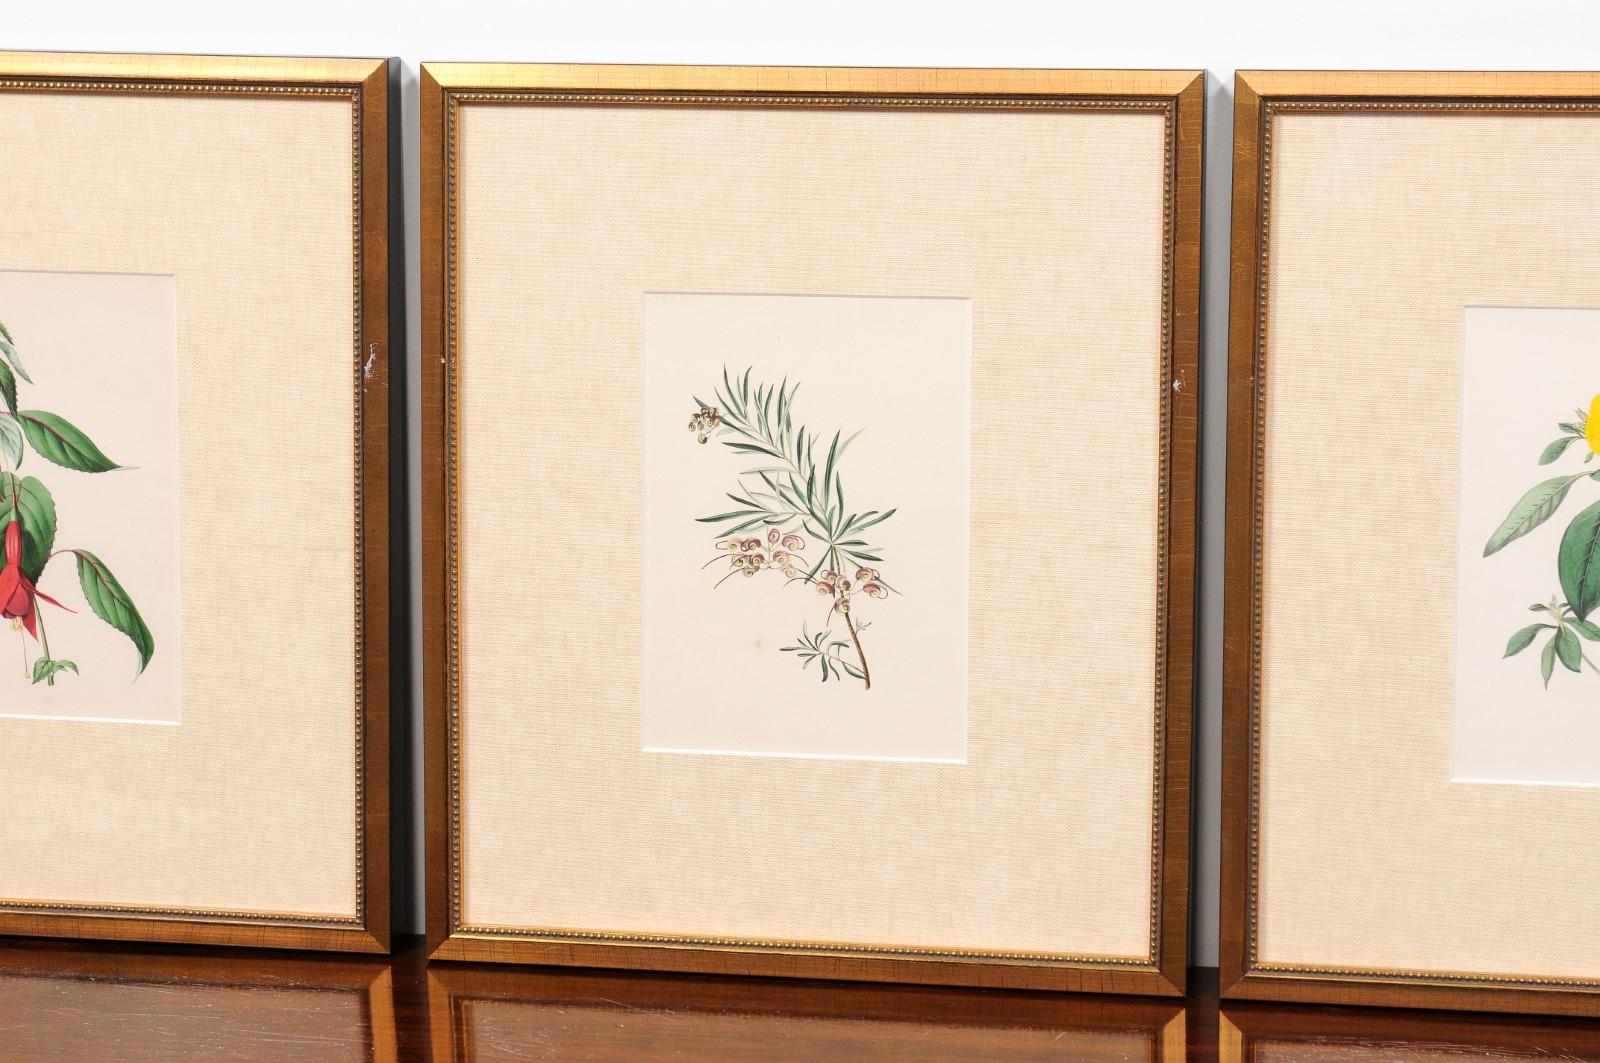  Victorian Floral Prints from The Museum of Flowers by Mary Elizabeth Rosenberg For Sale 7